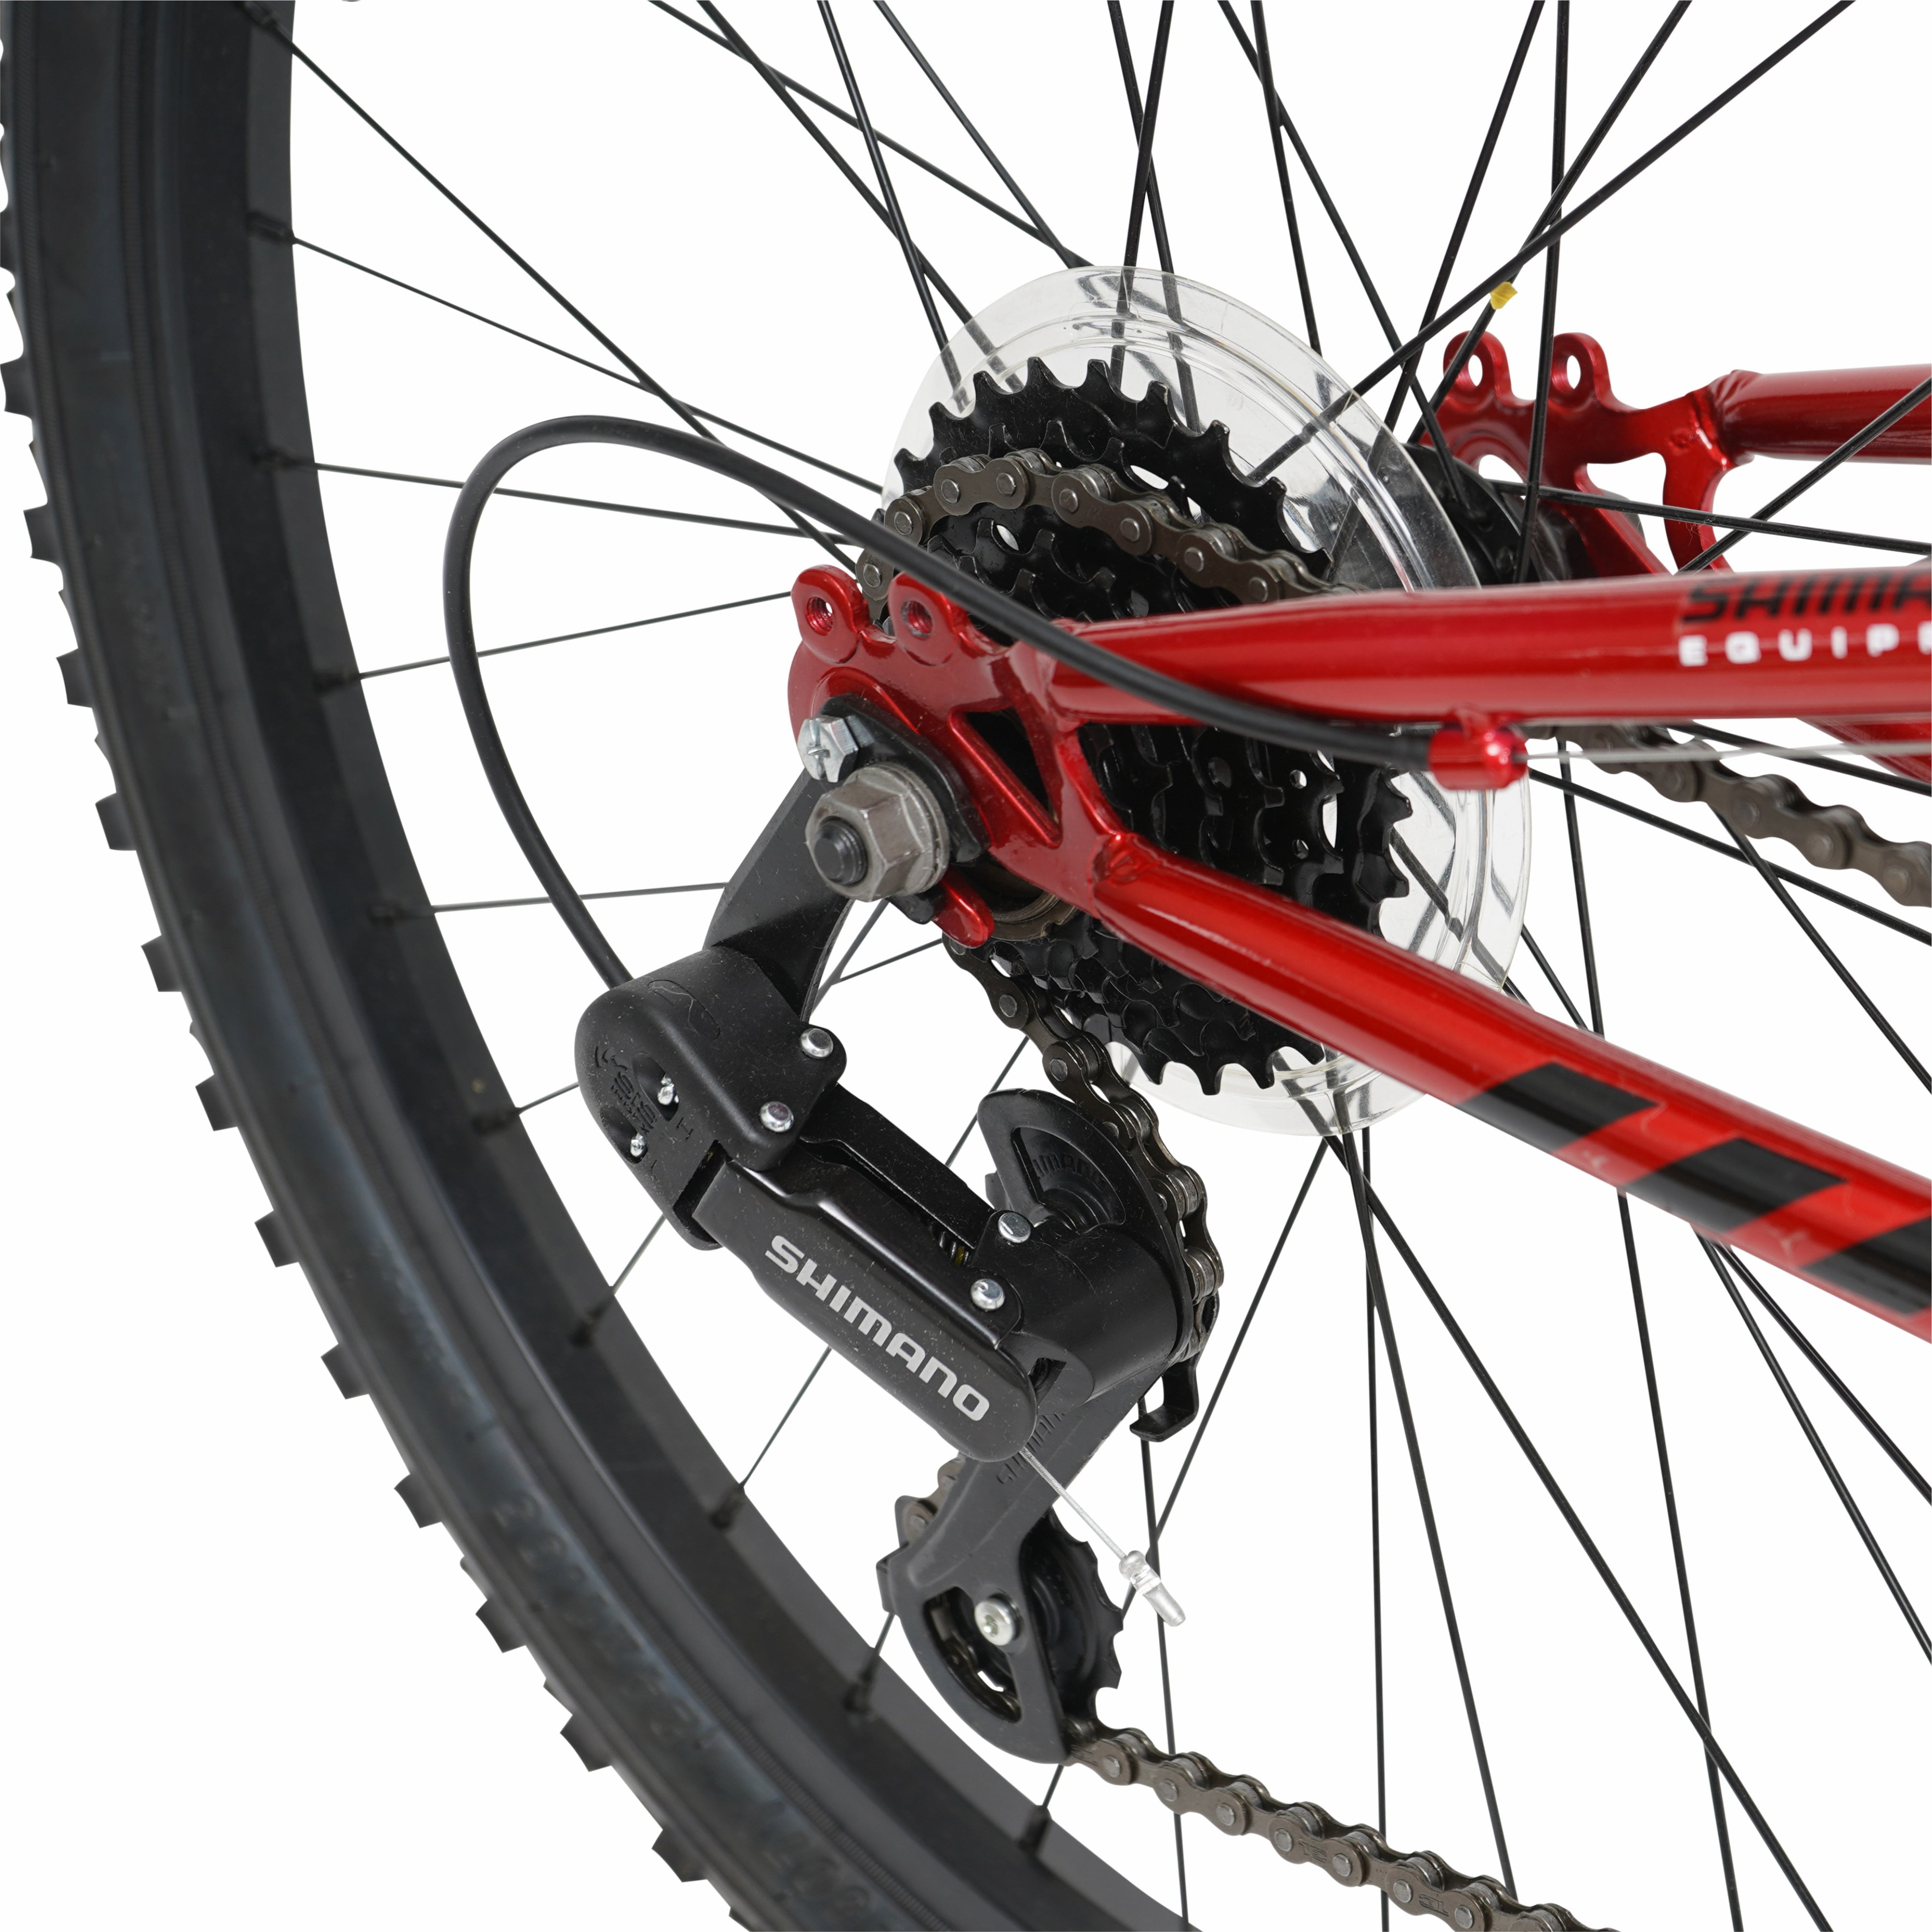 Hyper Bicycle 24 Shocker Mountain Bike for Kids, Red and Black 